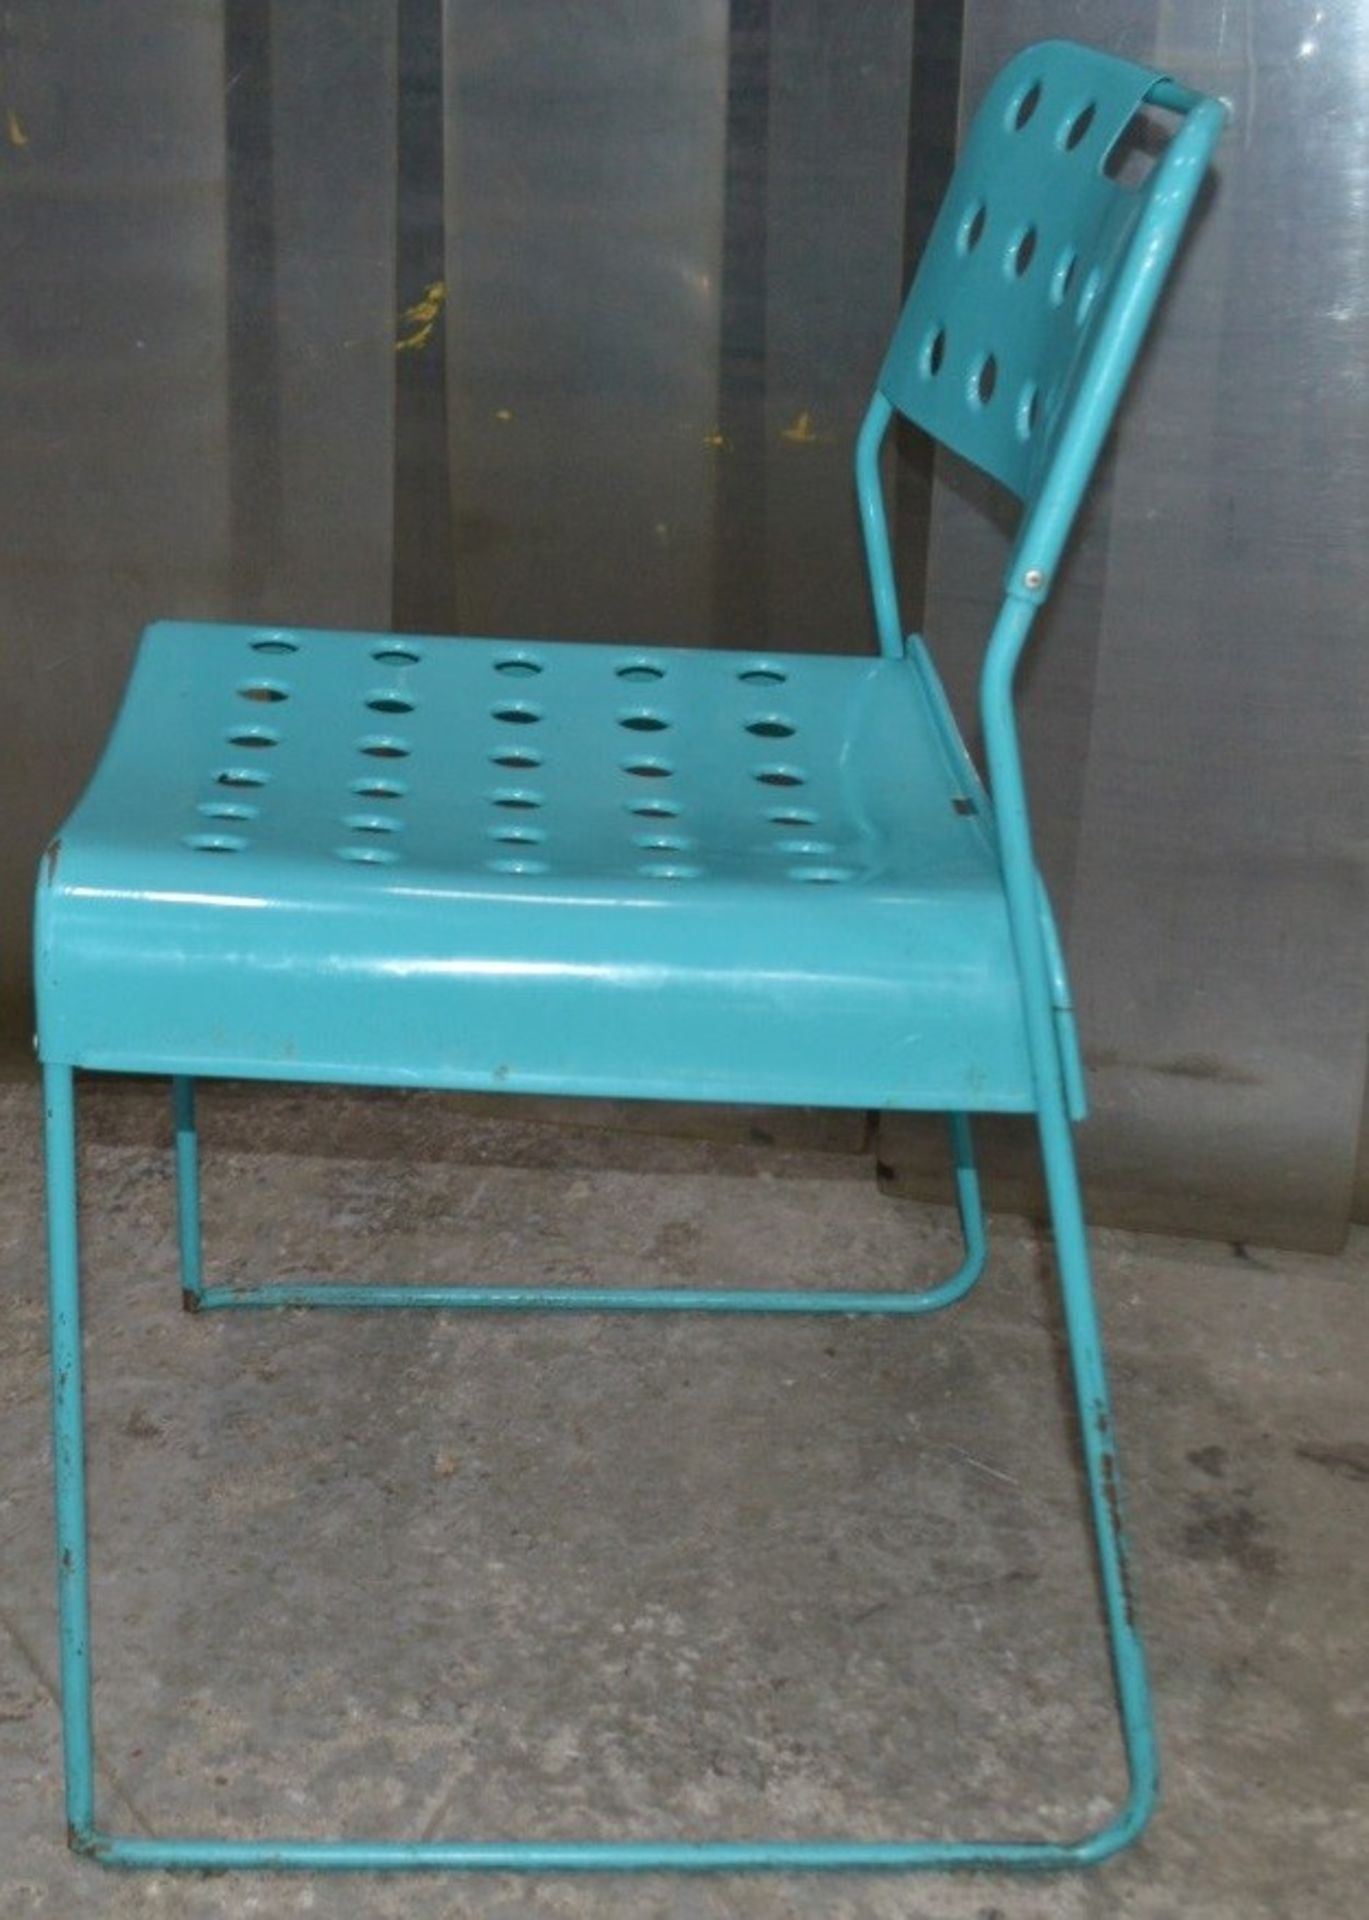 5 x Rustic Metal Commercial Bistro Chairs In Blue - Dimensions: H74 x W44 x D45cm, Seat 47cm - Image 2 of 4